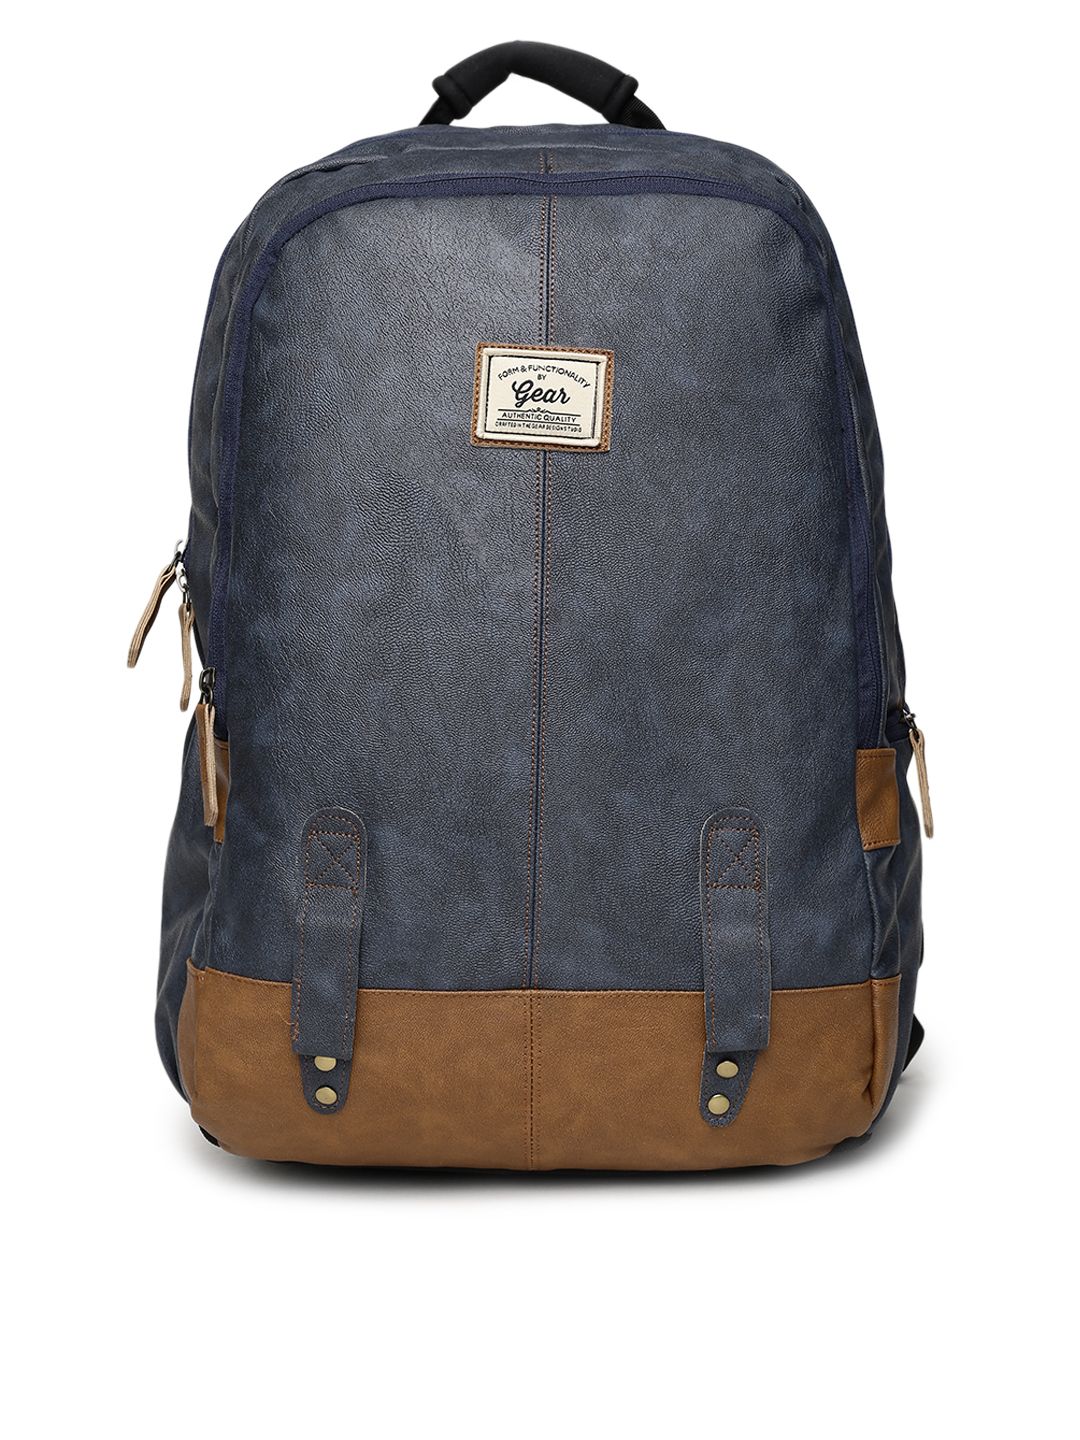 Gear Unisex Navy Blue Solid Backpack Price in India